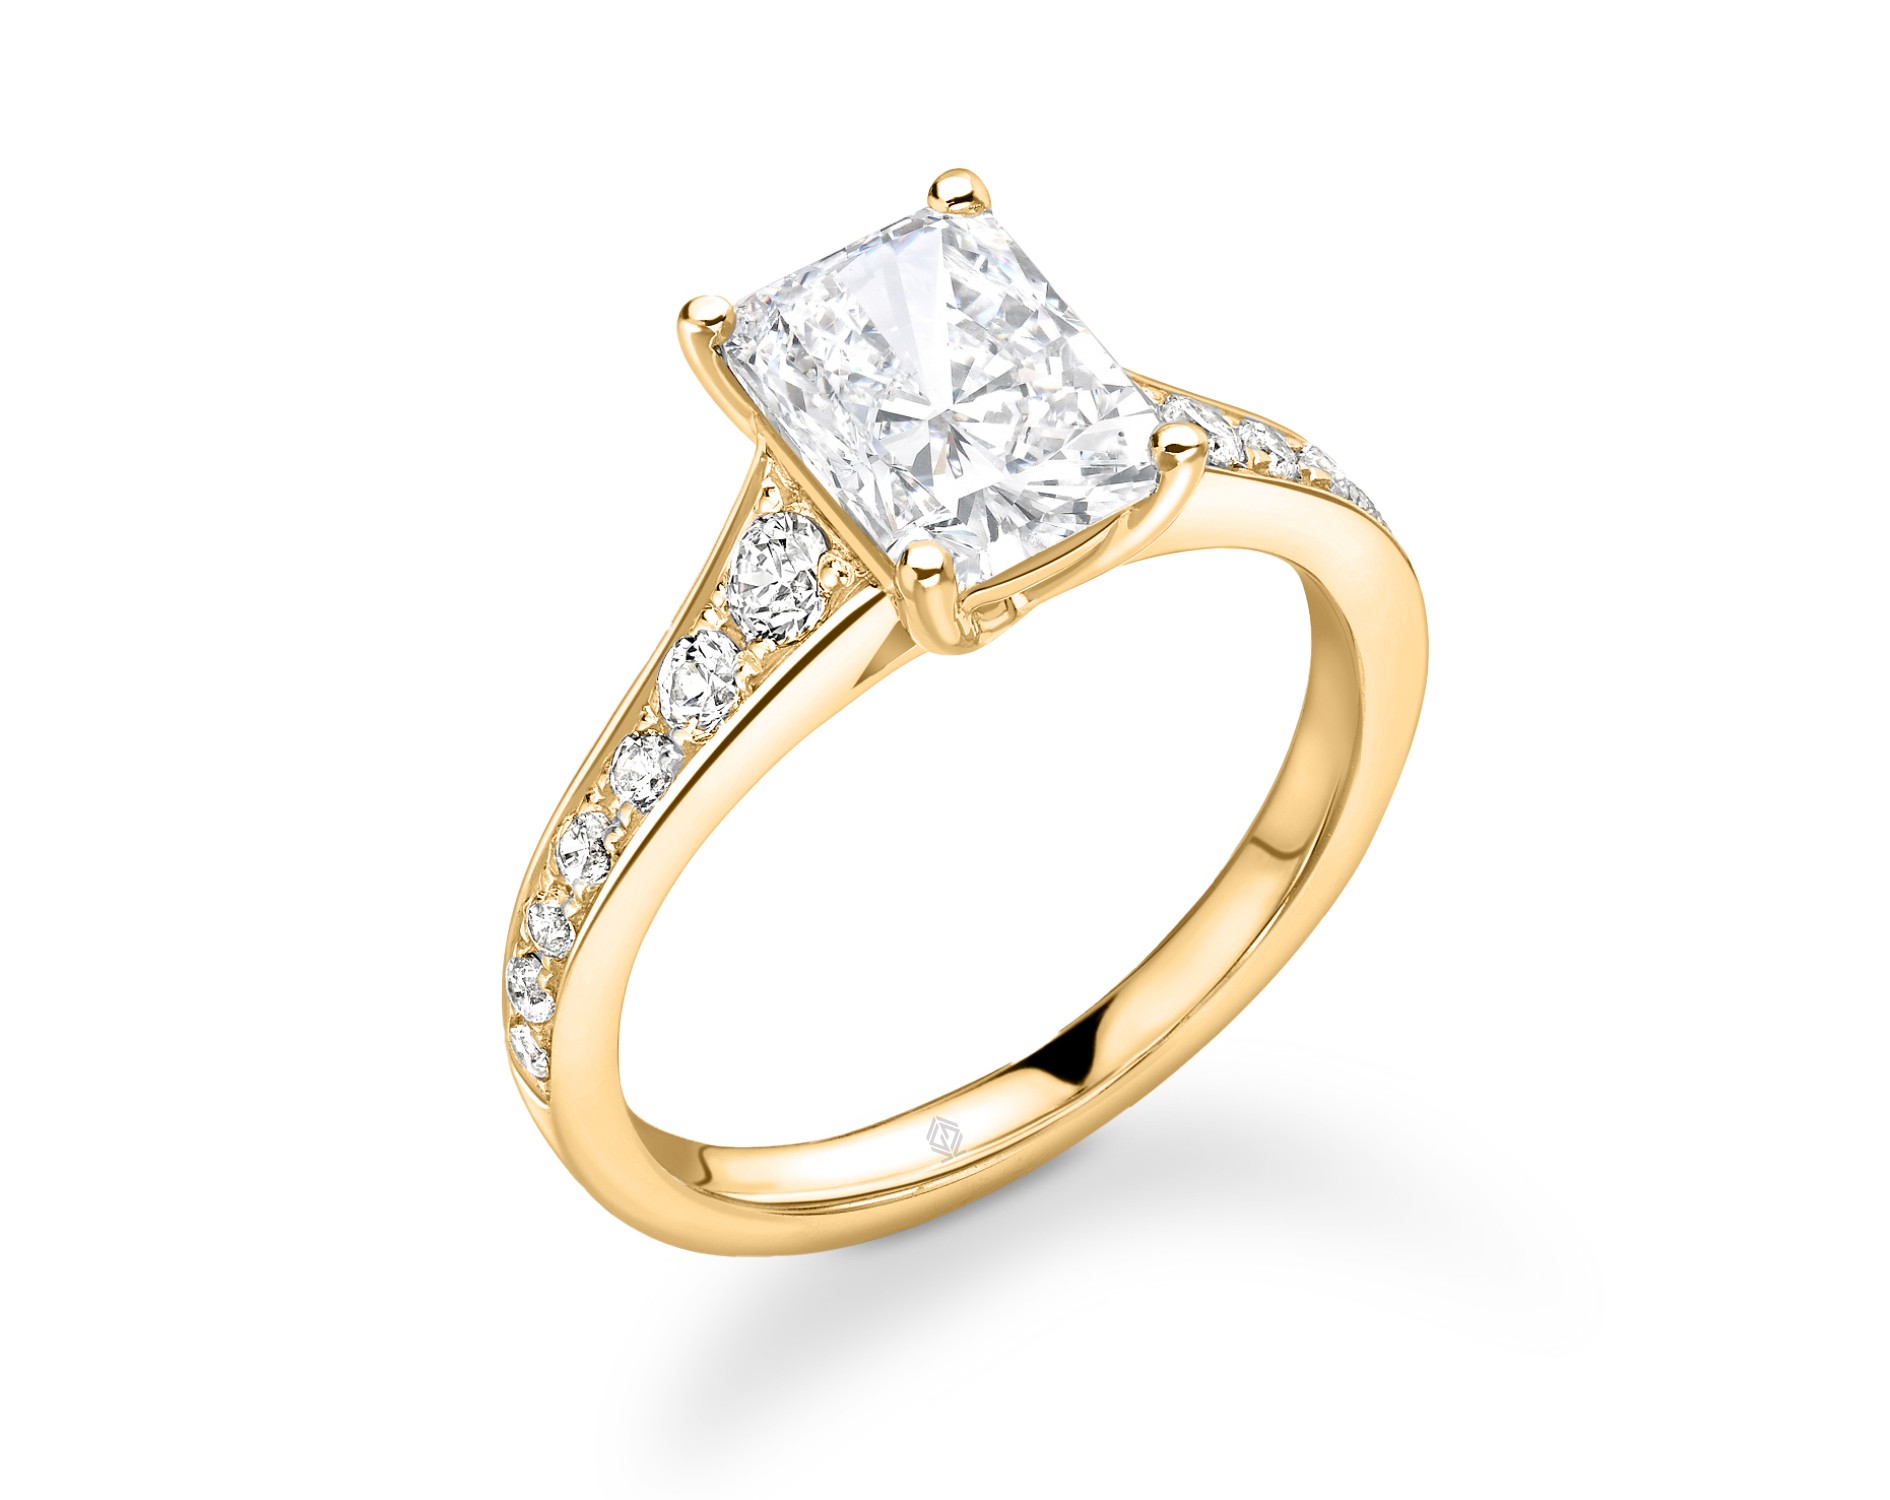 18K YELLOW GOLD Cushion Cut 4 Prong Diamond Engagement Ring with Chanel-Set Side Stones